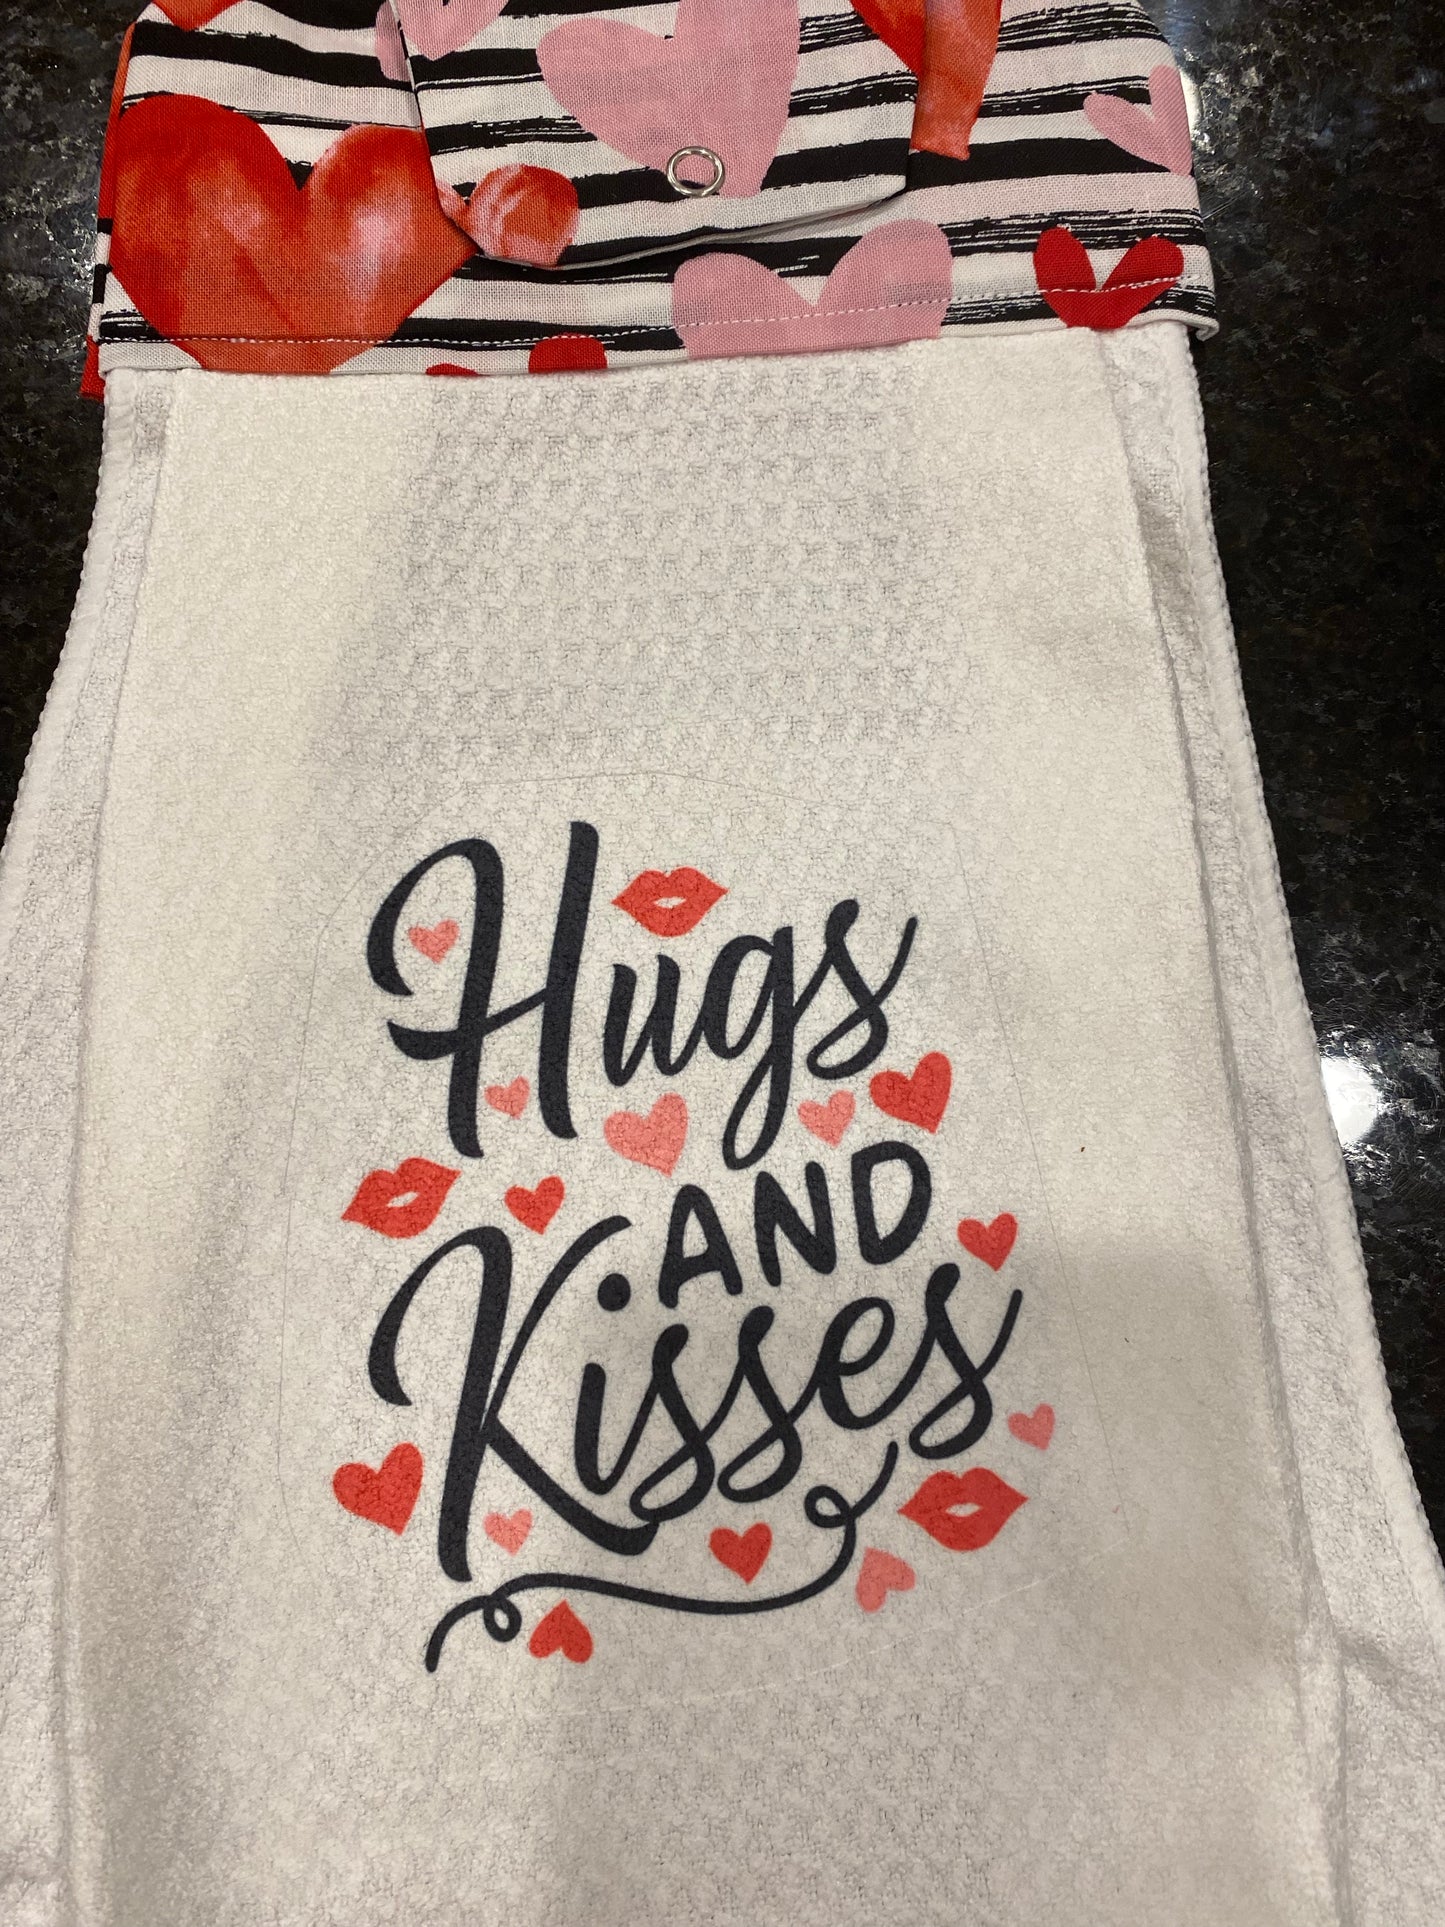 Valentine’s Day towels